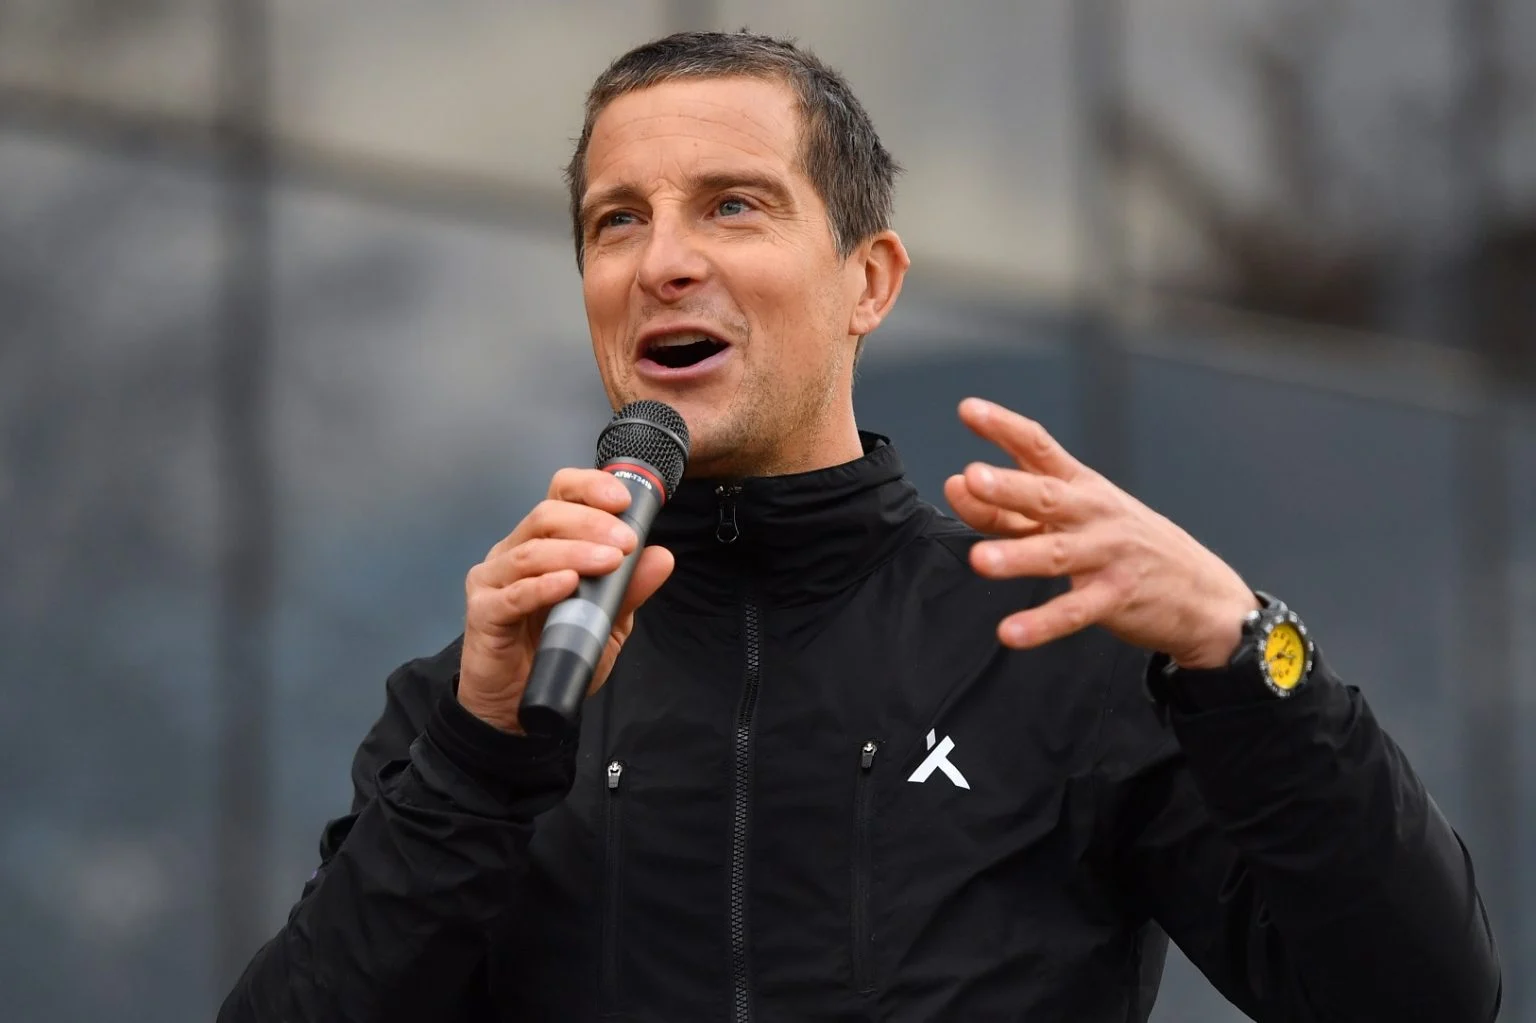 Bear Grylls Net Worth, Career, Home, Wife, and Other Facts